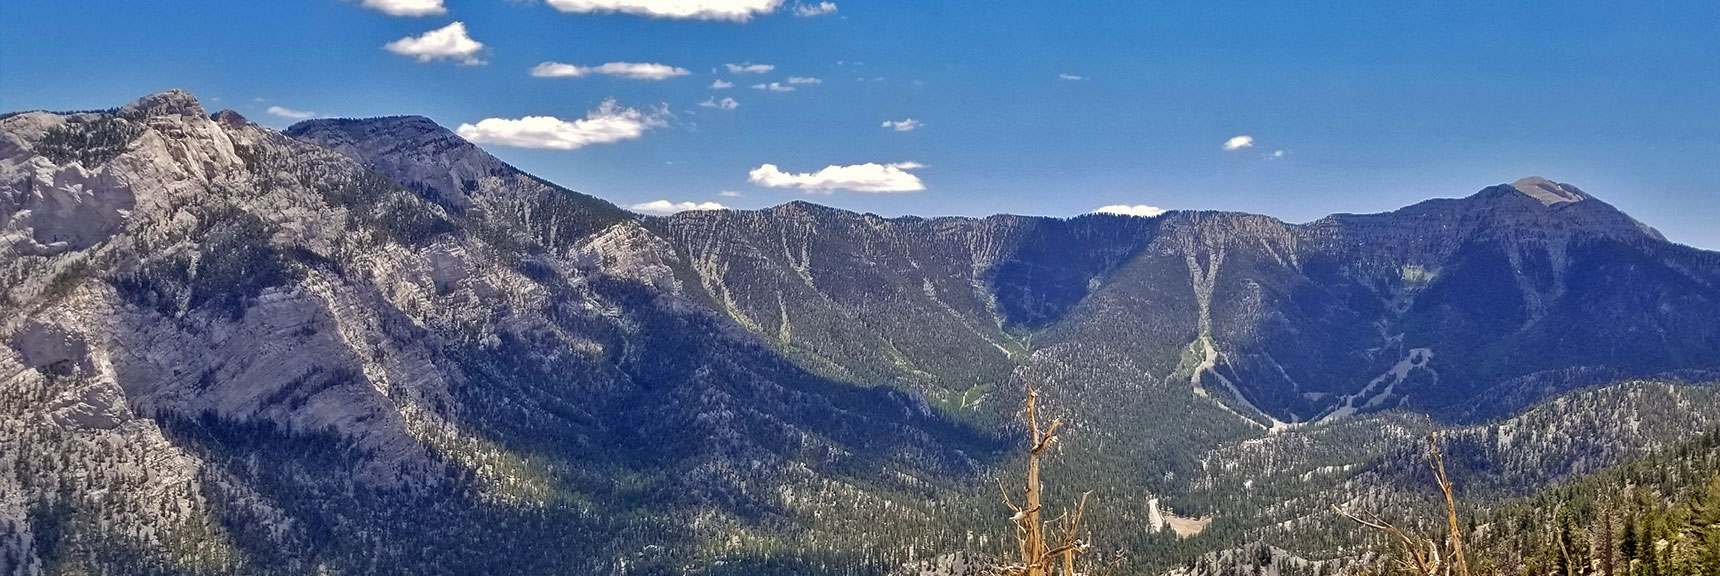 Large View of Lee Canyon East Ridge. Watch for Approach Ridges and Washes | Lee Canyon to Kyle Canyon | Potential Routes | Mt Charleston Wilderness | Spring Mountains, Nevada